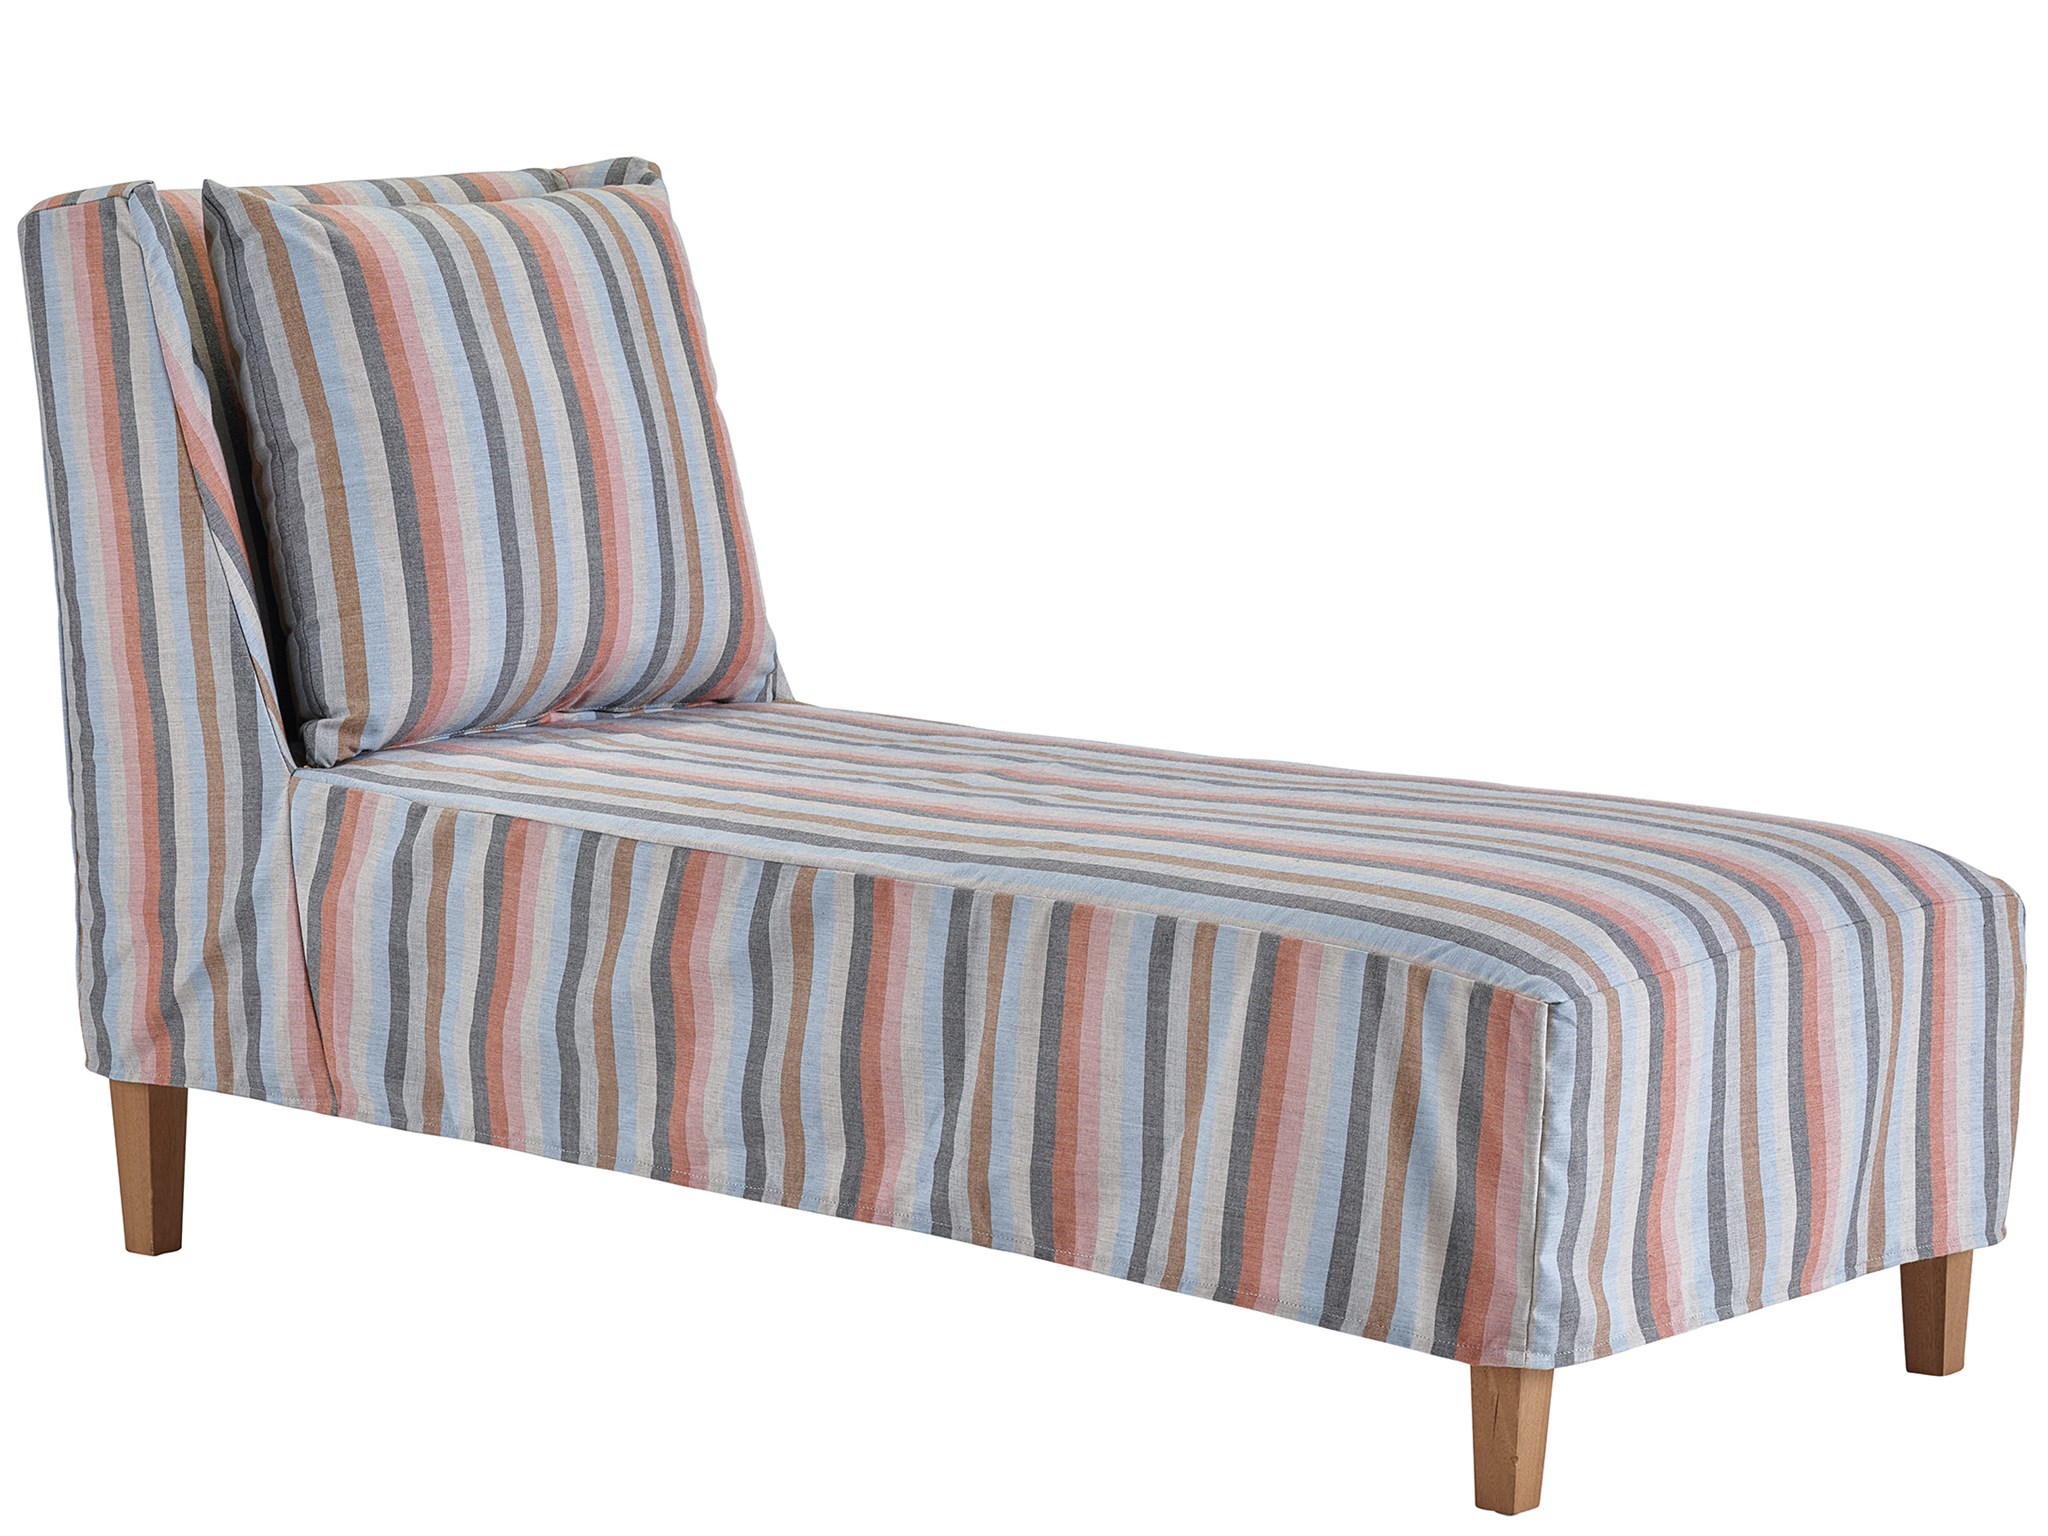 Garland Outdoor Slipcover Chaise - Special Order